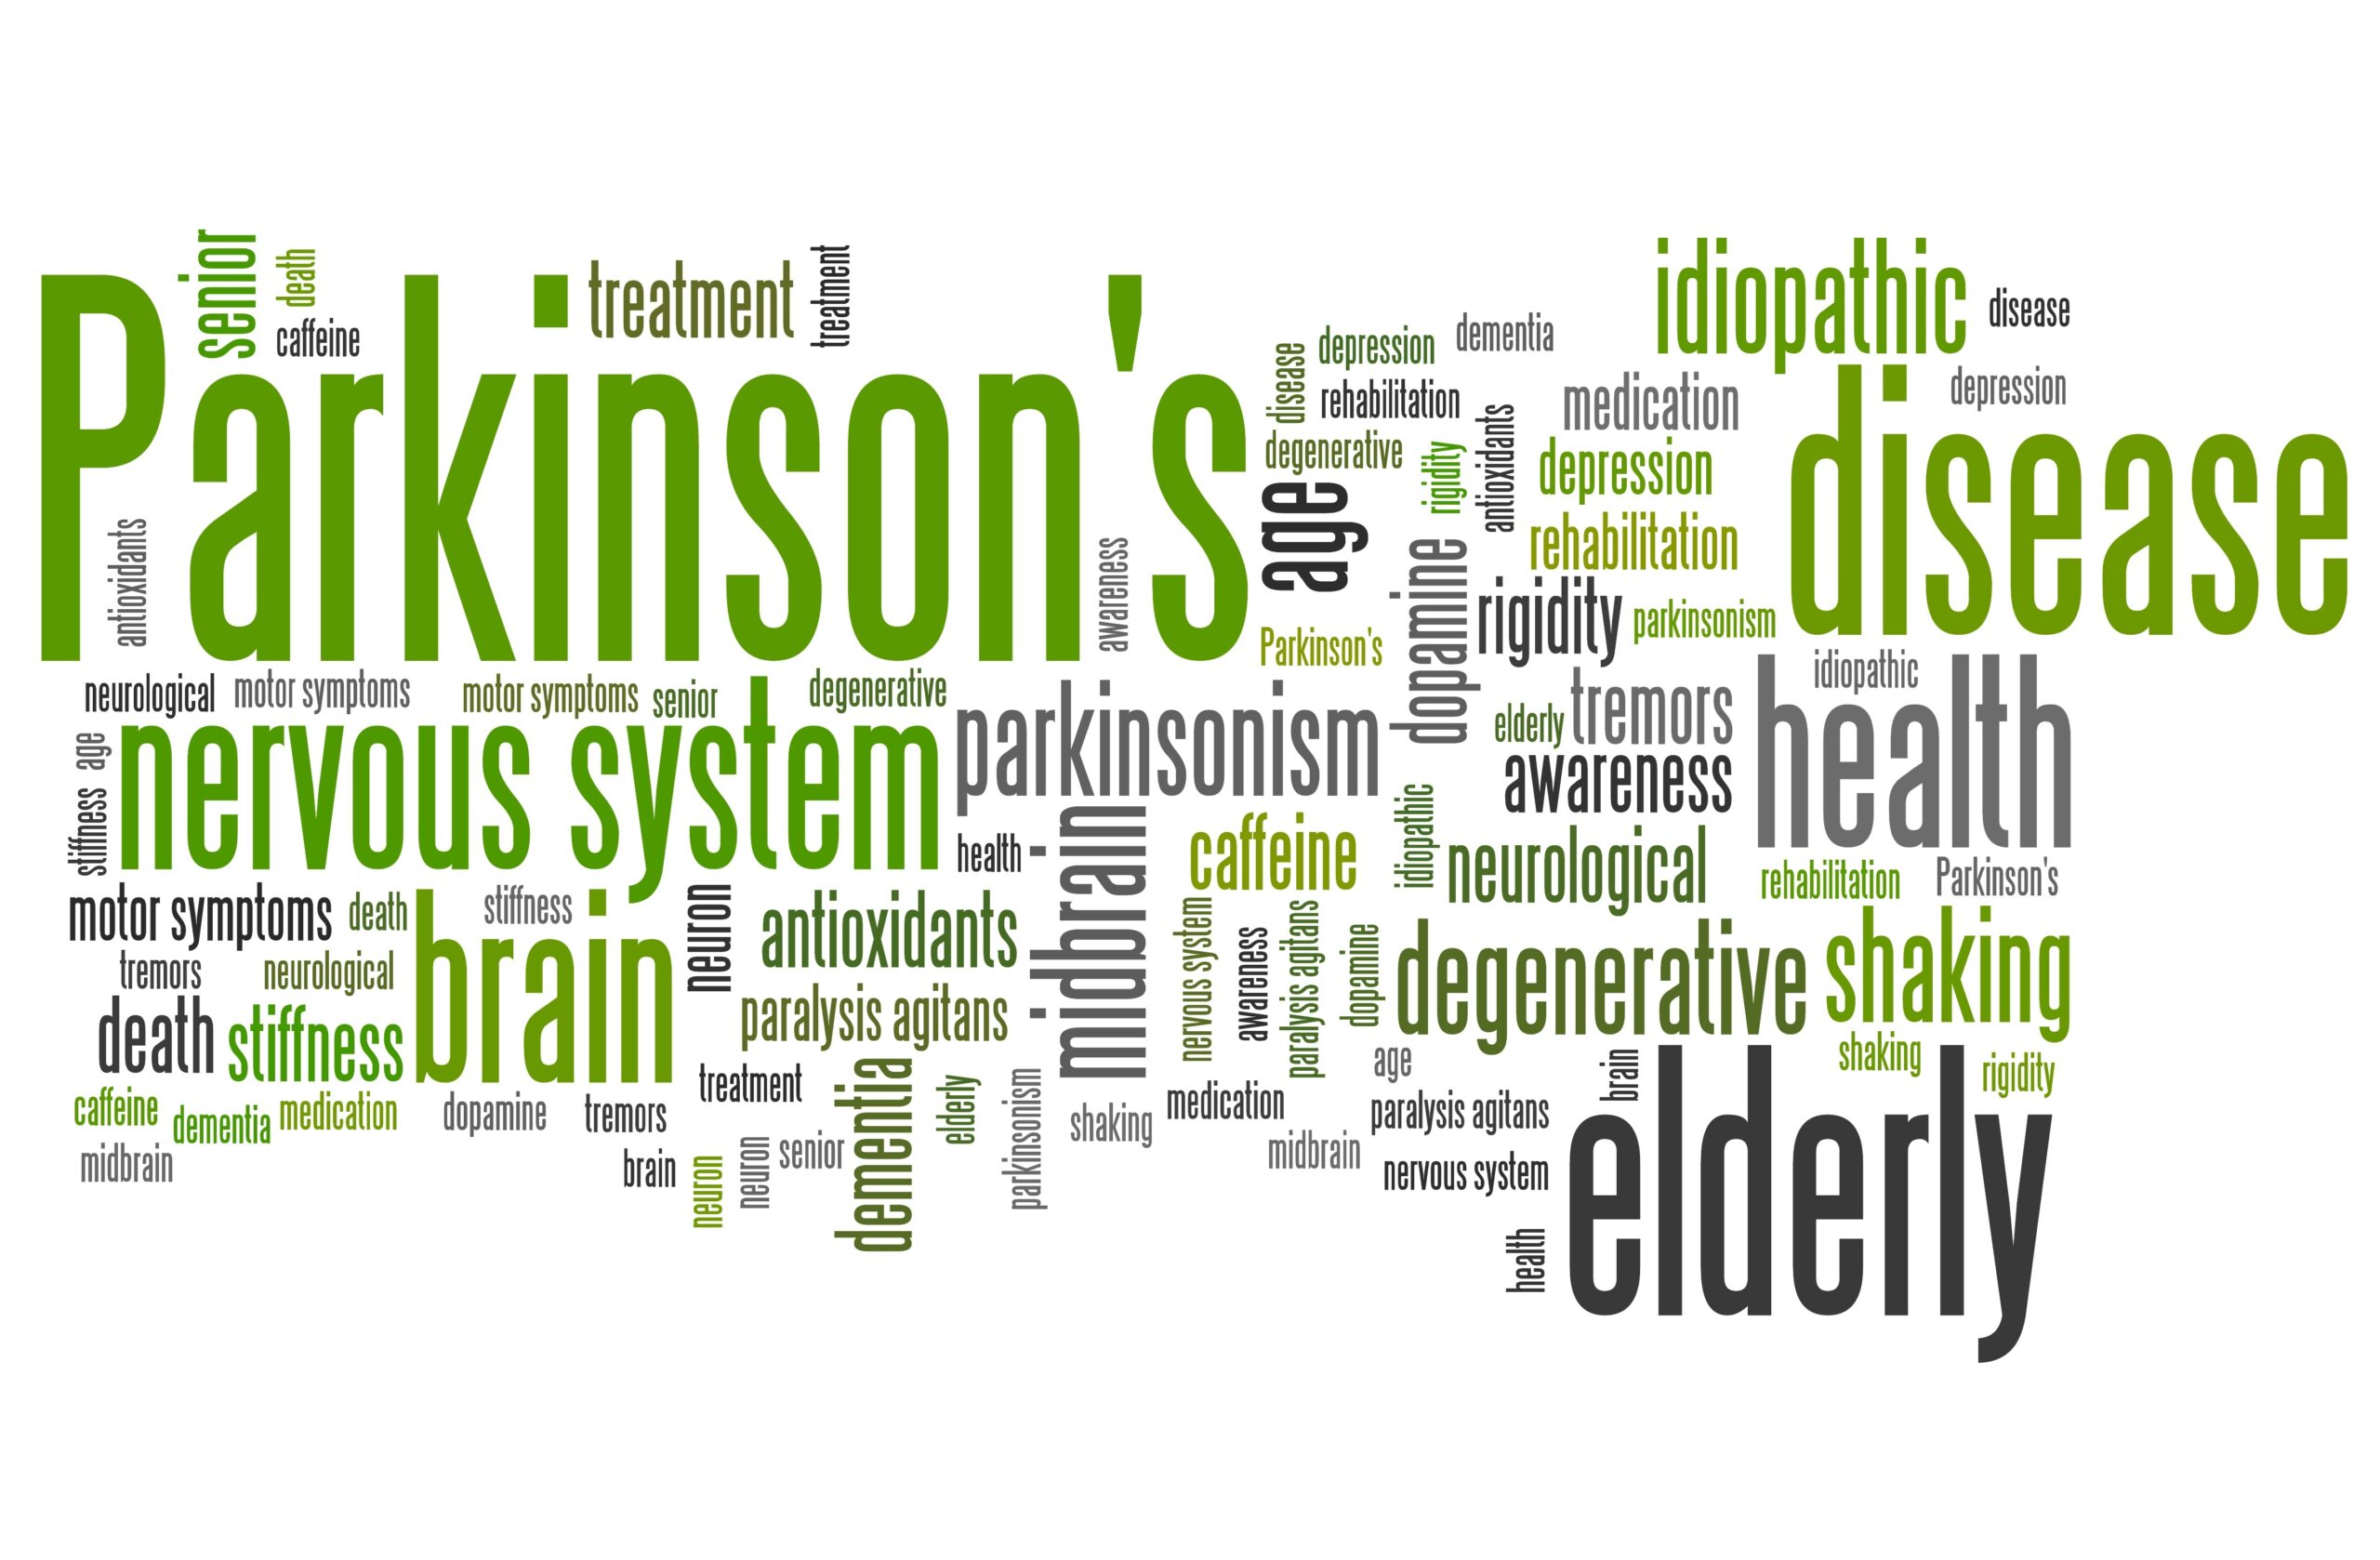 Researchers Identify A Potential New Therapeutic Target In Parkinson's Disease